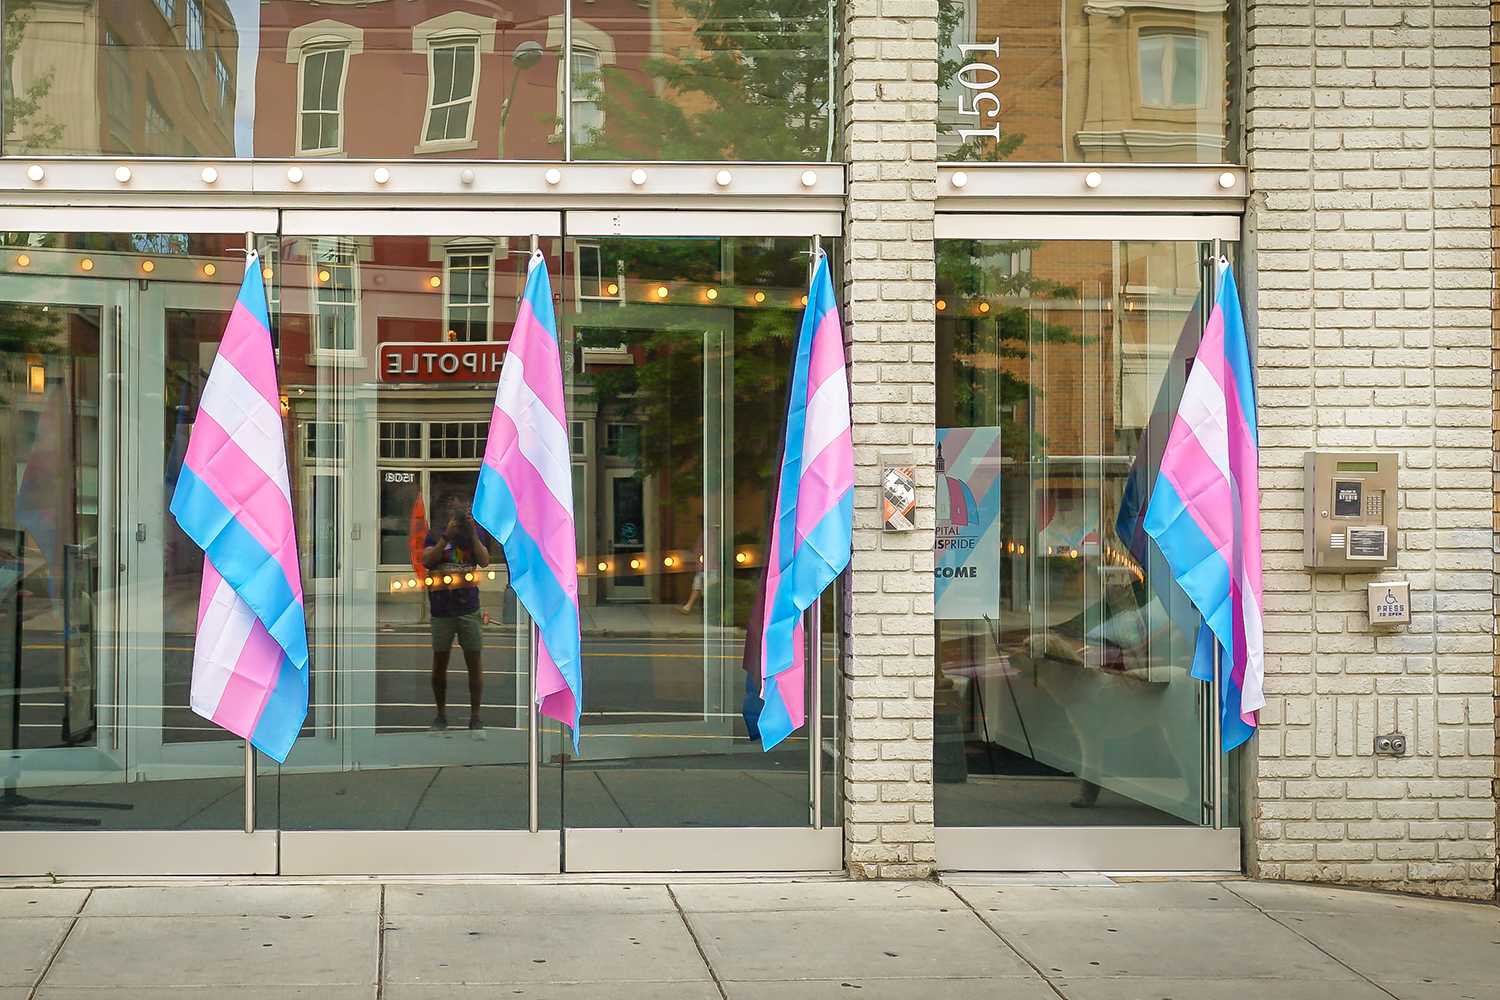 Because life is amazing, and we can, in the capital of a world learning to <3 better :) "

Washington, DC's Capital TransPride was on May 20, 2017, hosted by The Studio Theatre